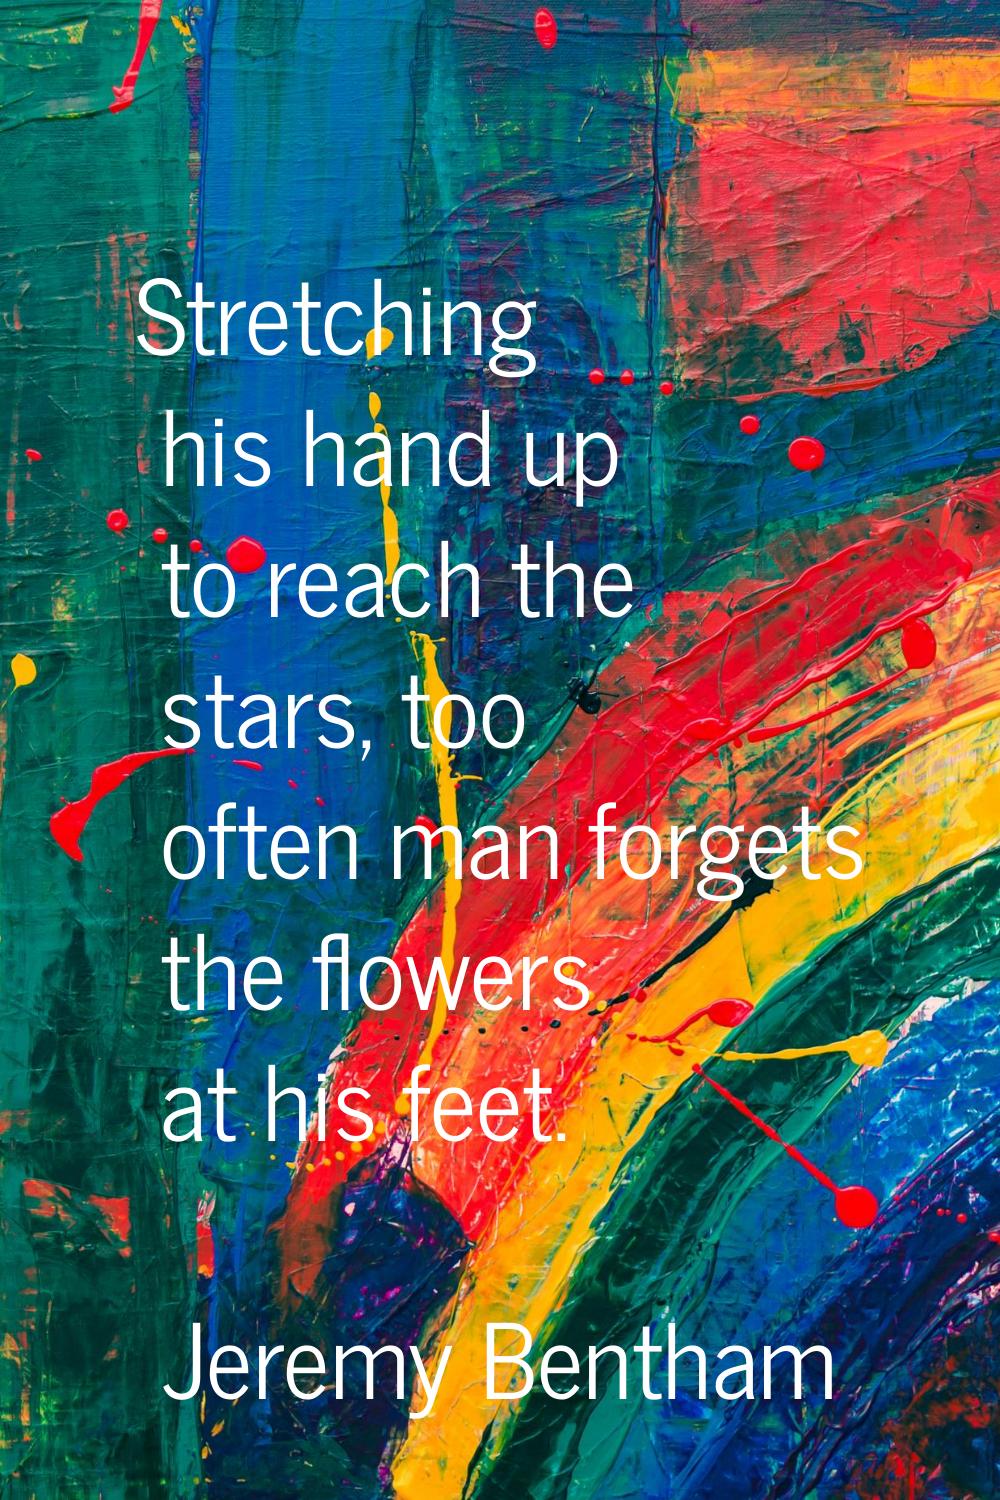 Stretching his hand up to reach the stars, too often man forgets the flowers at his feet.